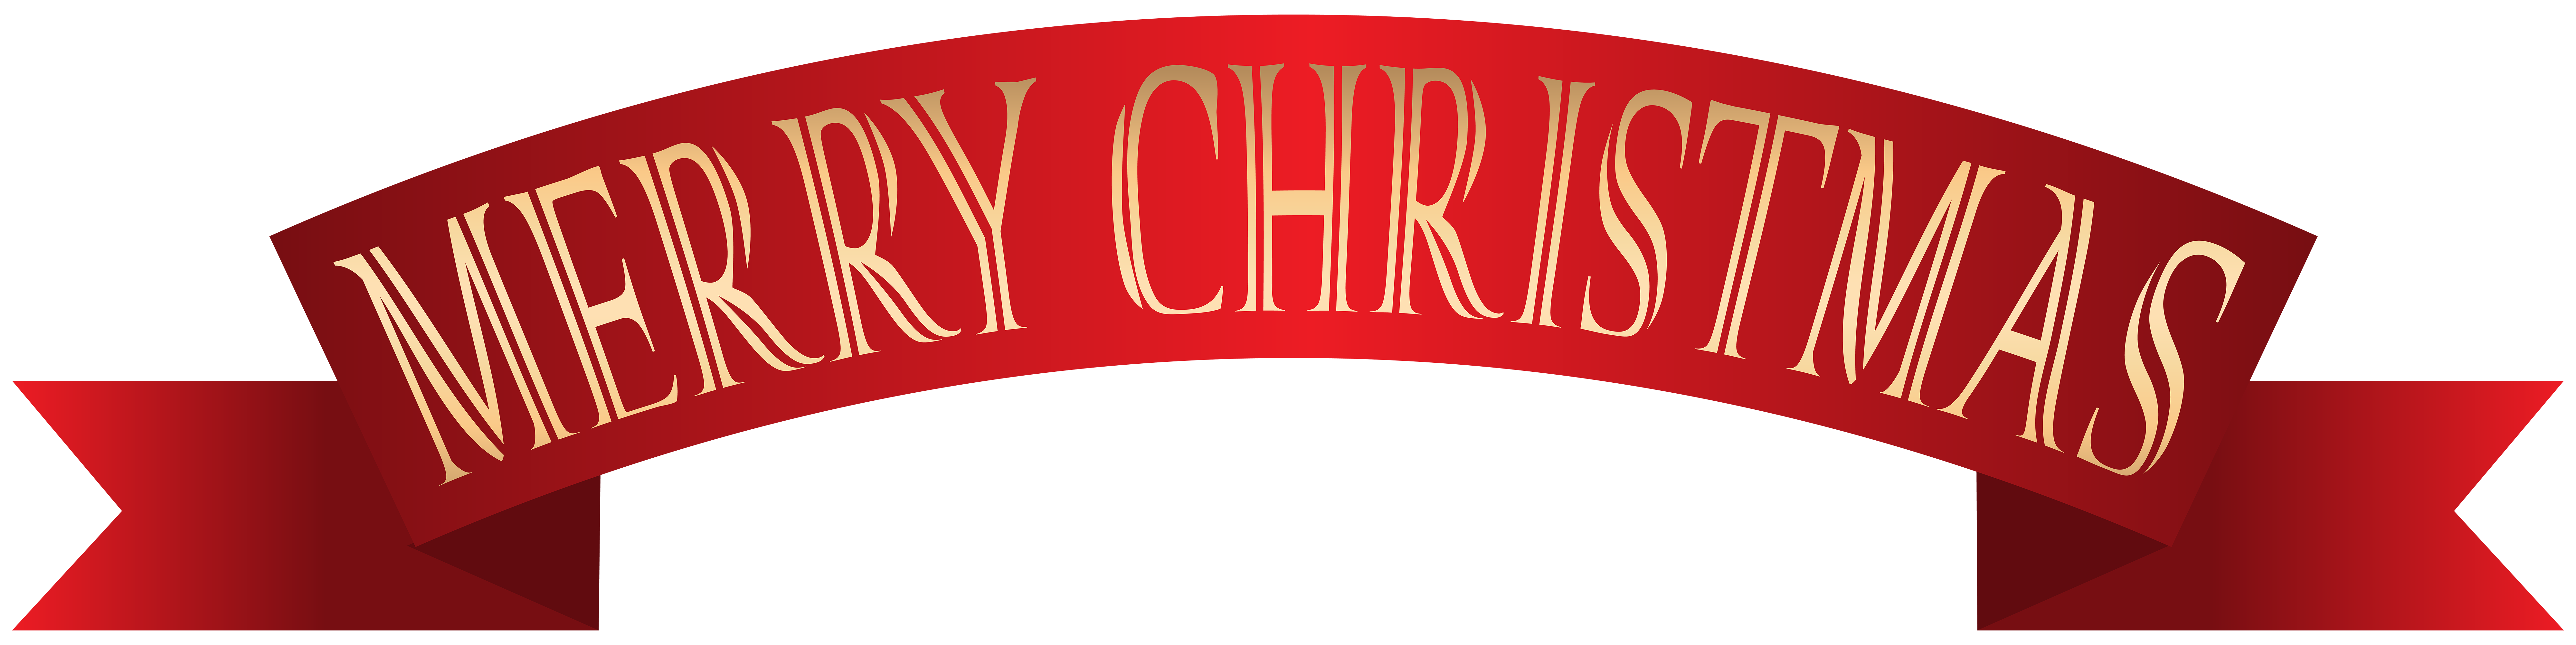 free-merry-christmas-banner-clipart-10-free-cliparts-download-images